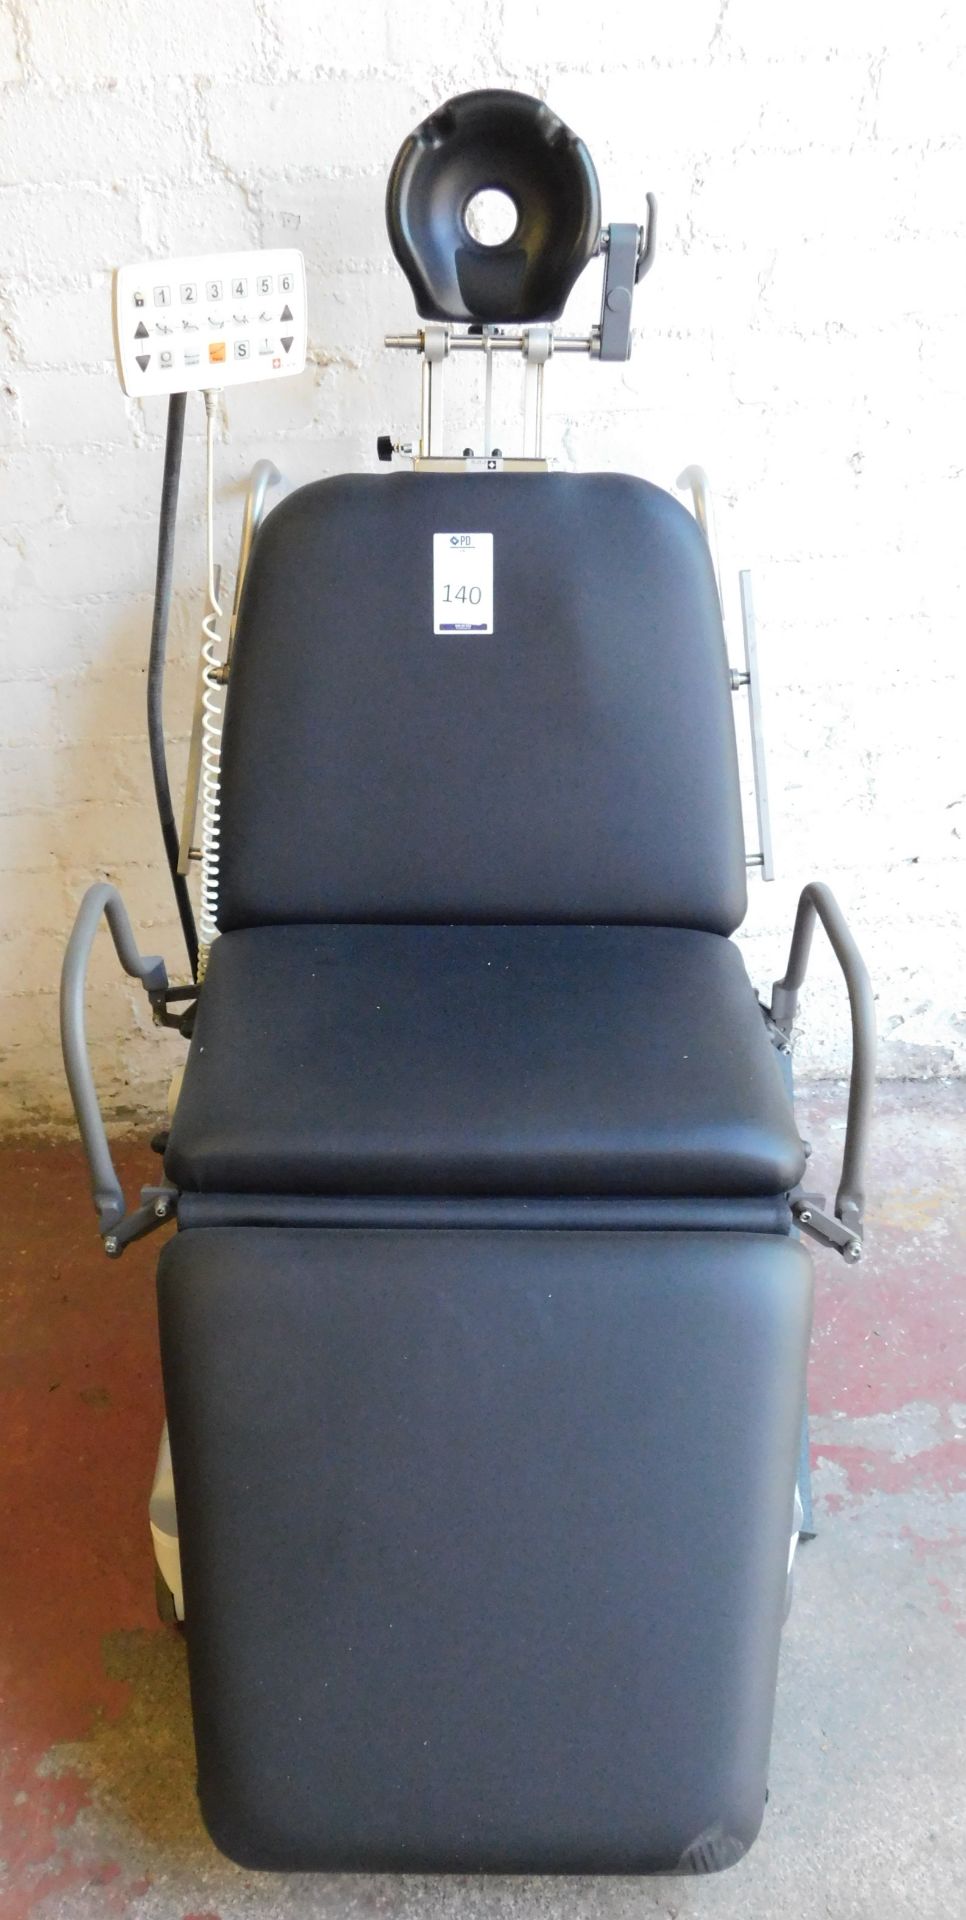 Rini Ophthalmic Operating Chair, Serial Number 0080-04 (Location: Bushey. Please Refer to General